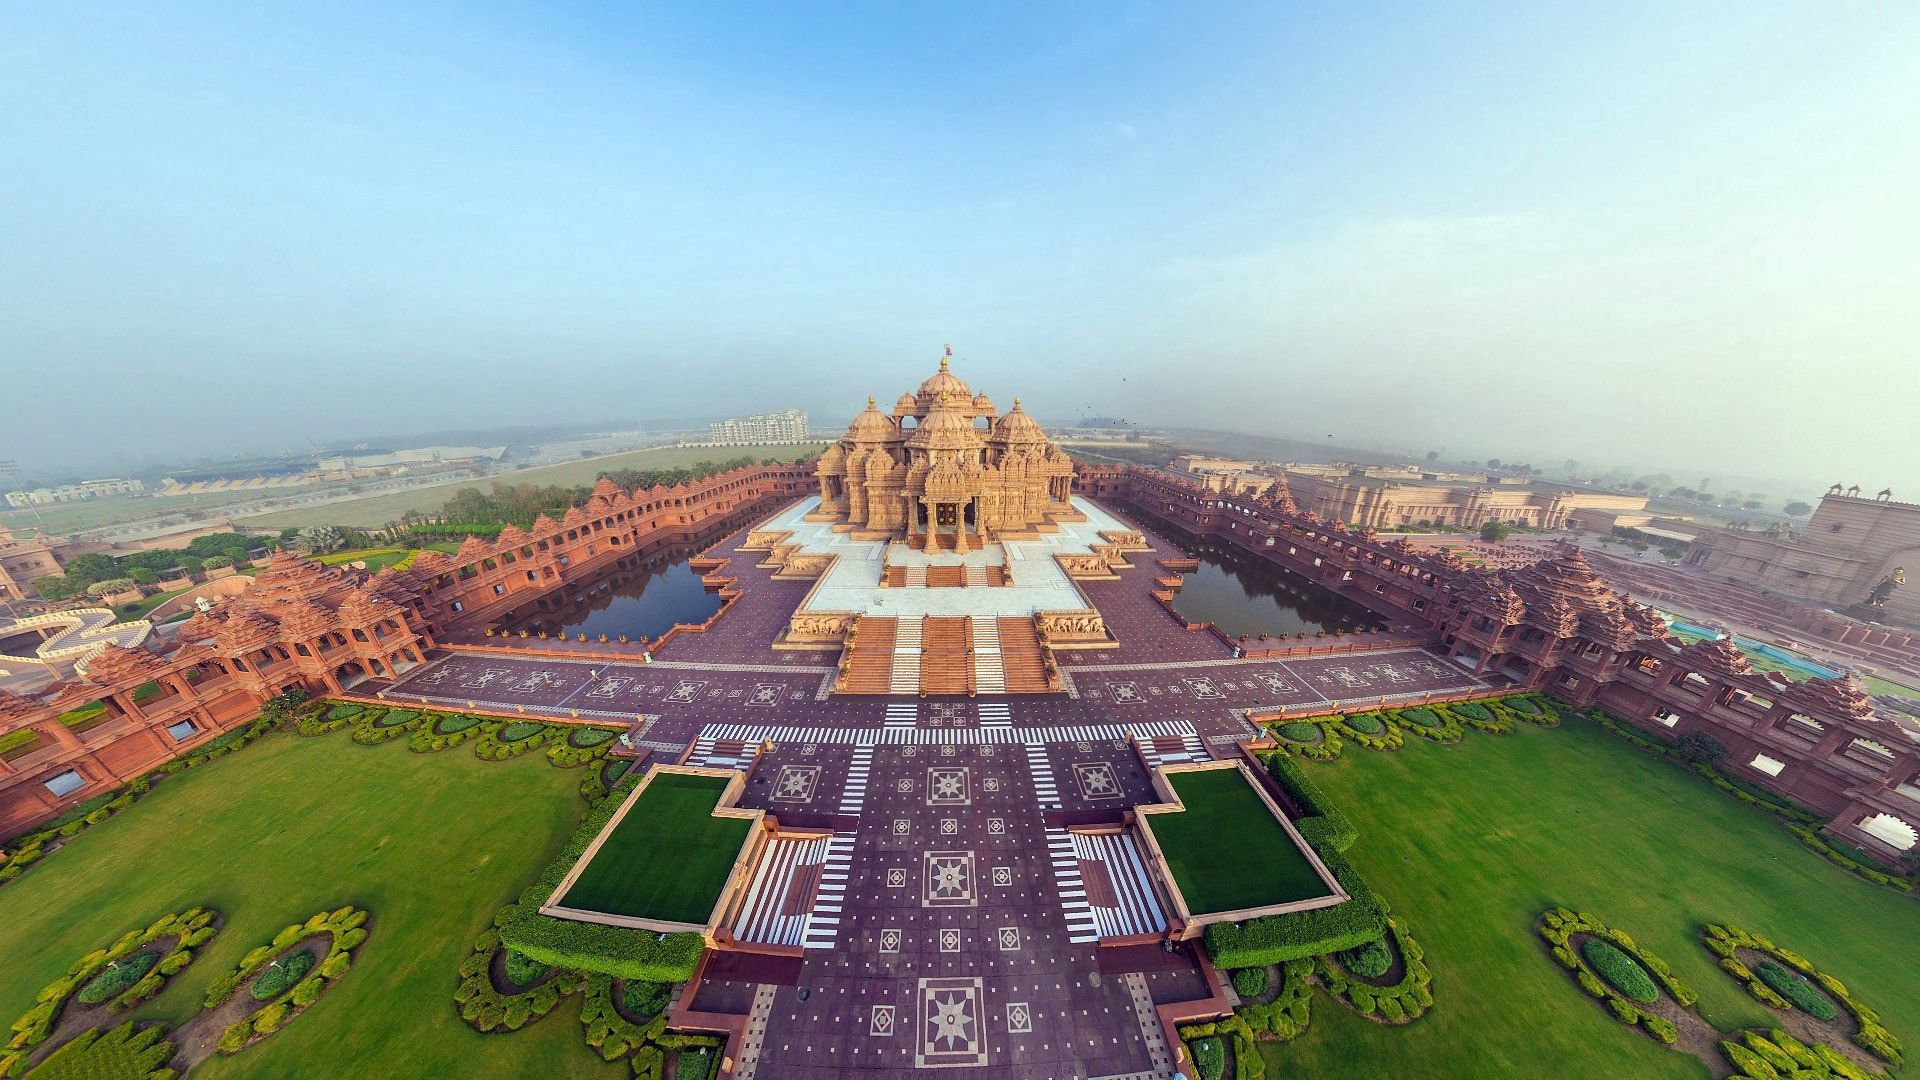 android india, handsomely, akshardham temple, panorama, cities, view from above, it's beautiful